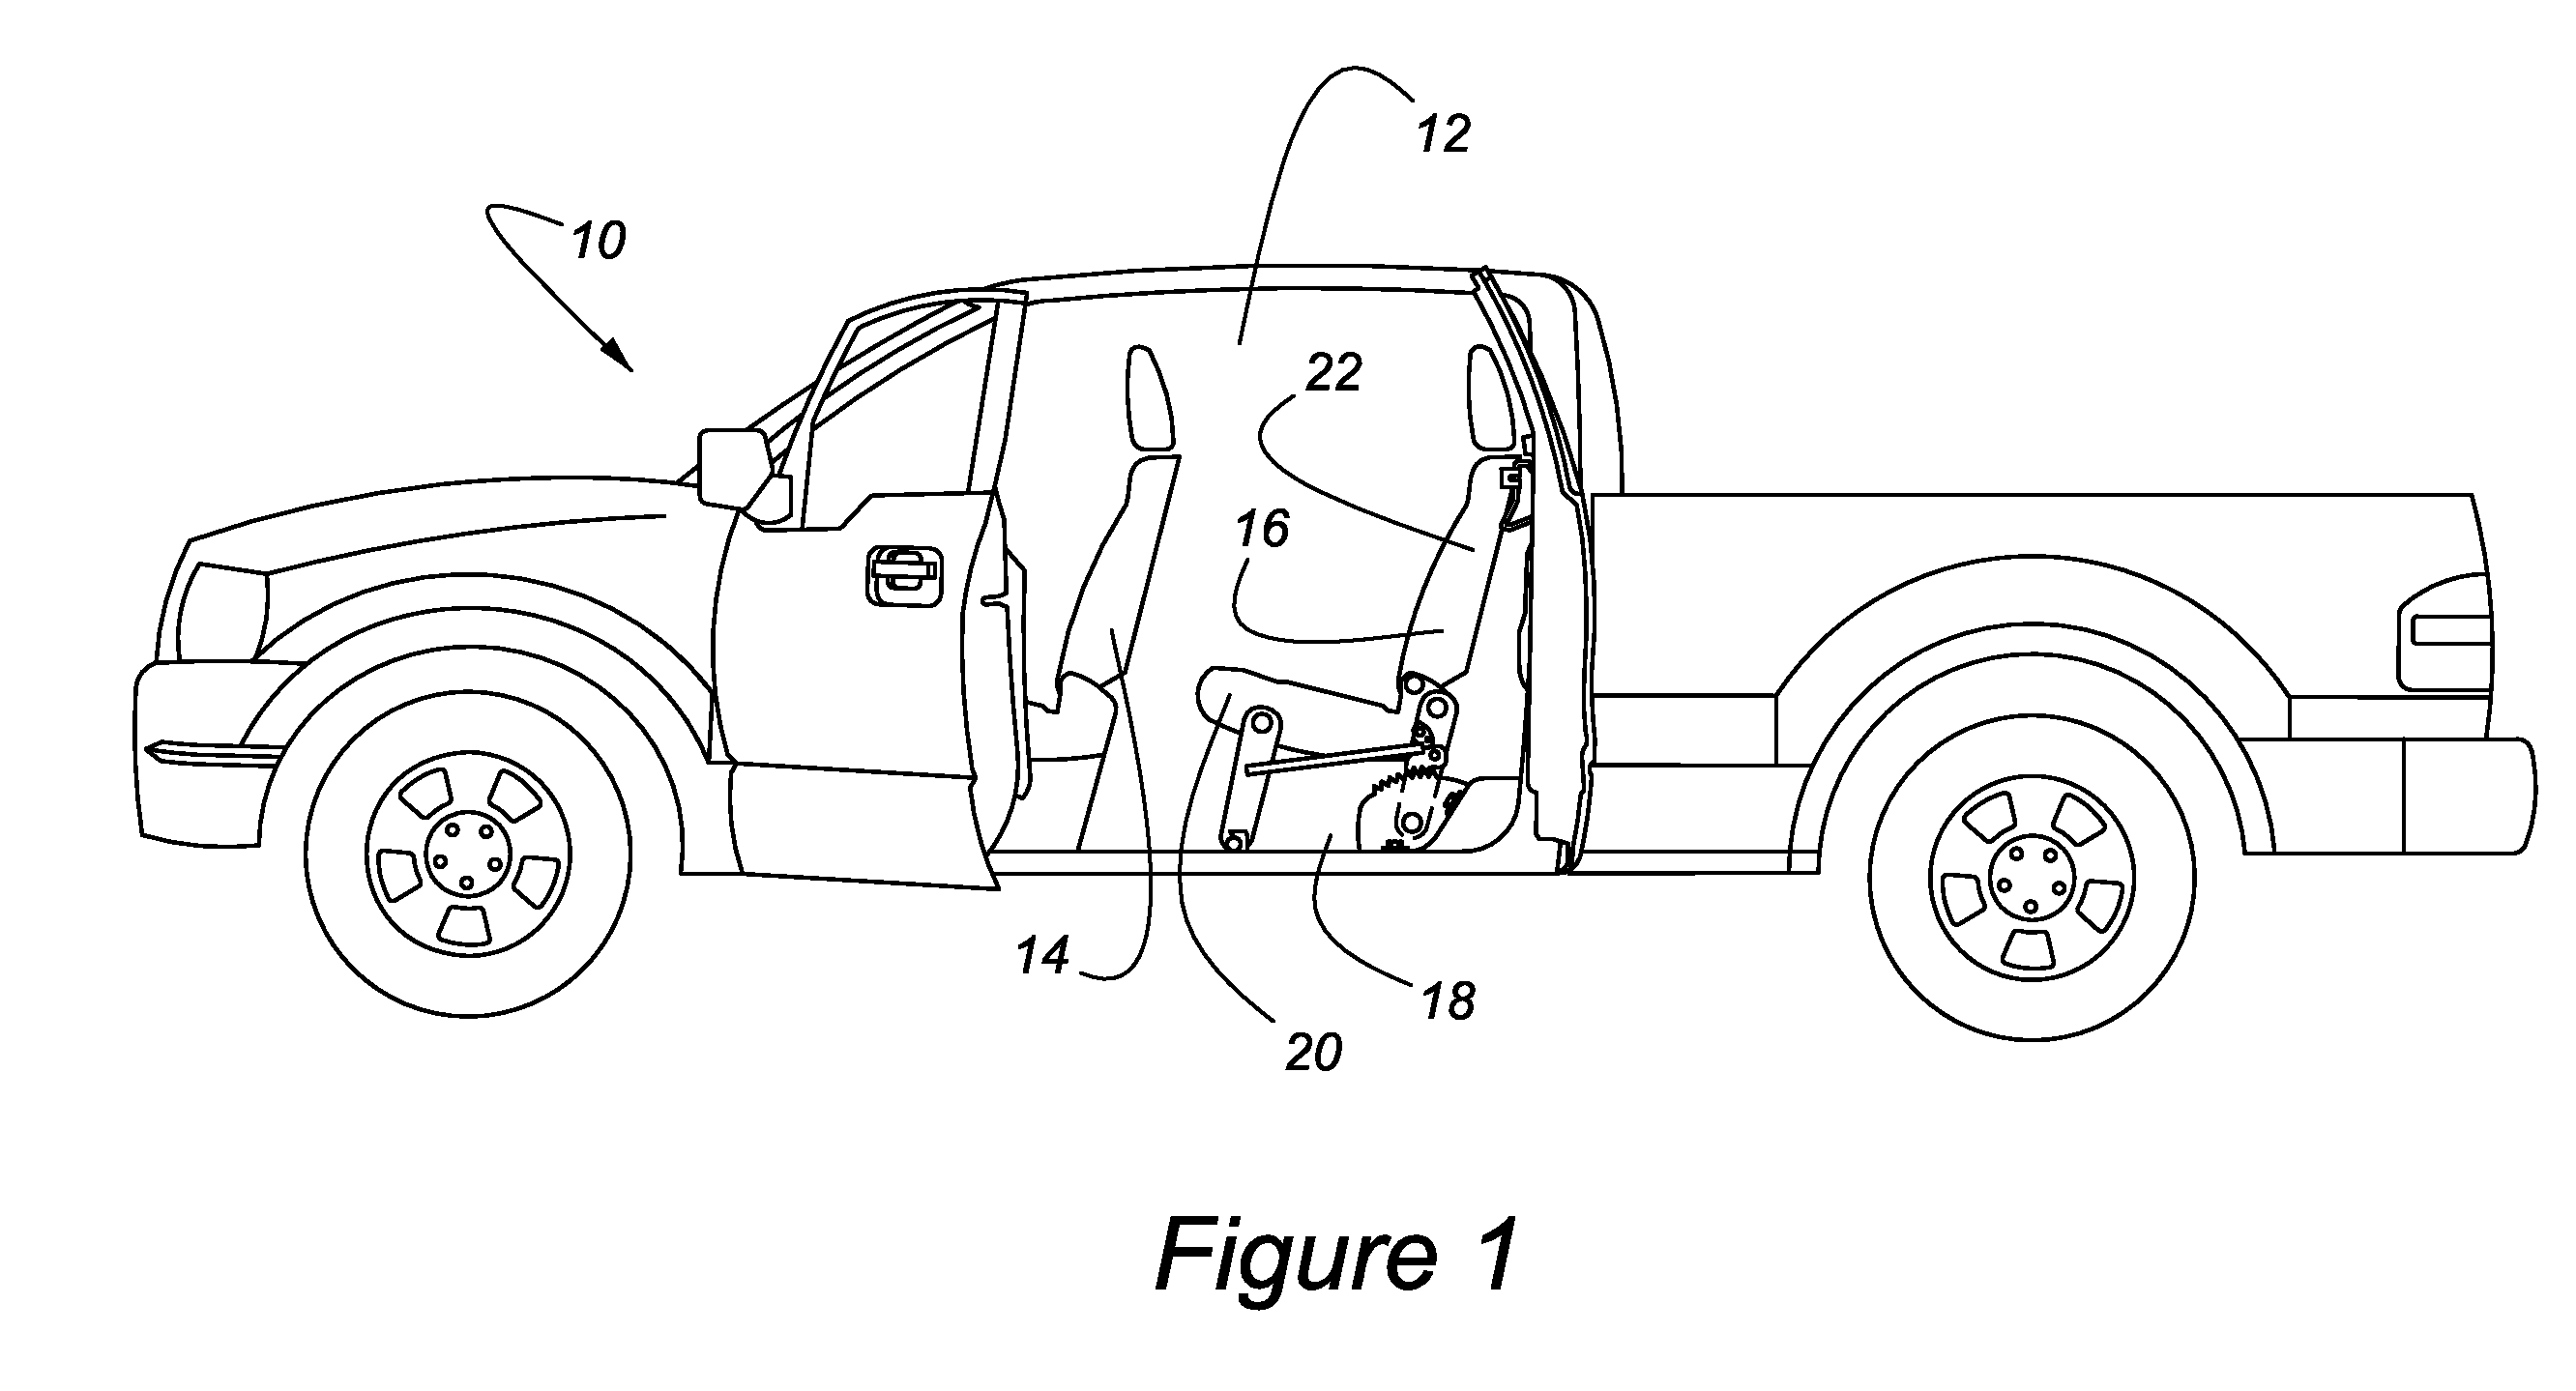 Reclining rear seat for vehicle having four-bar link